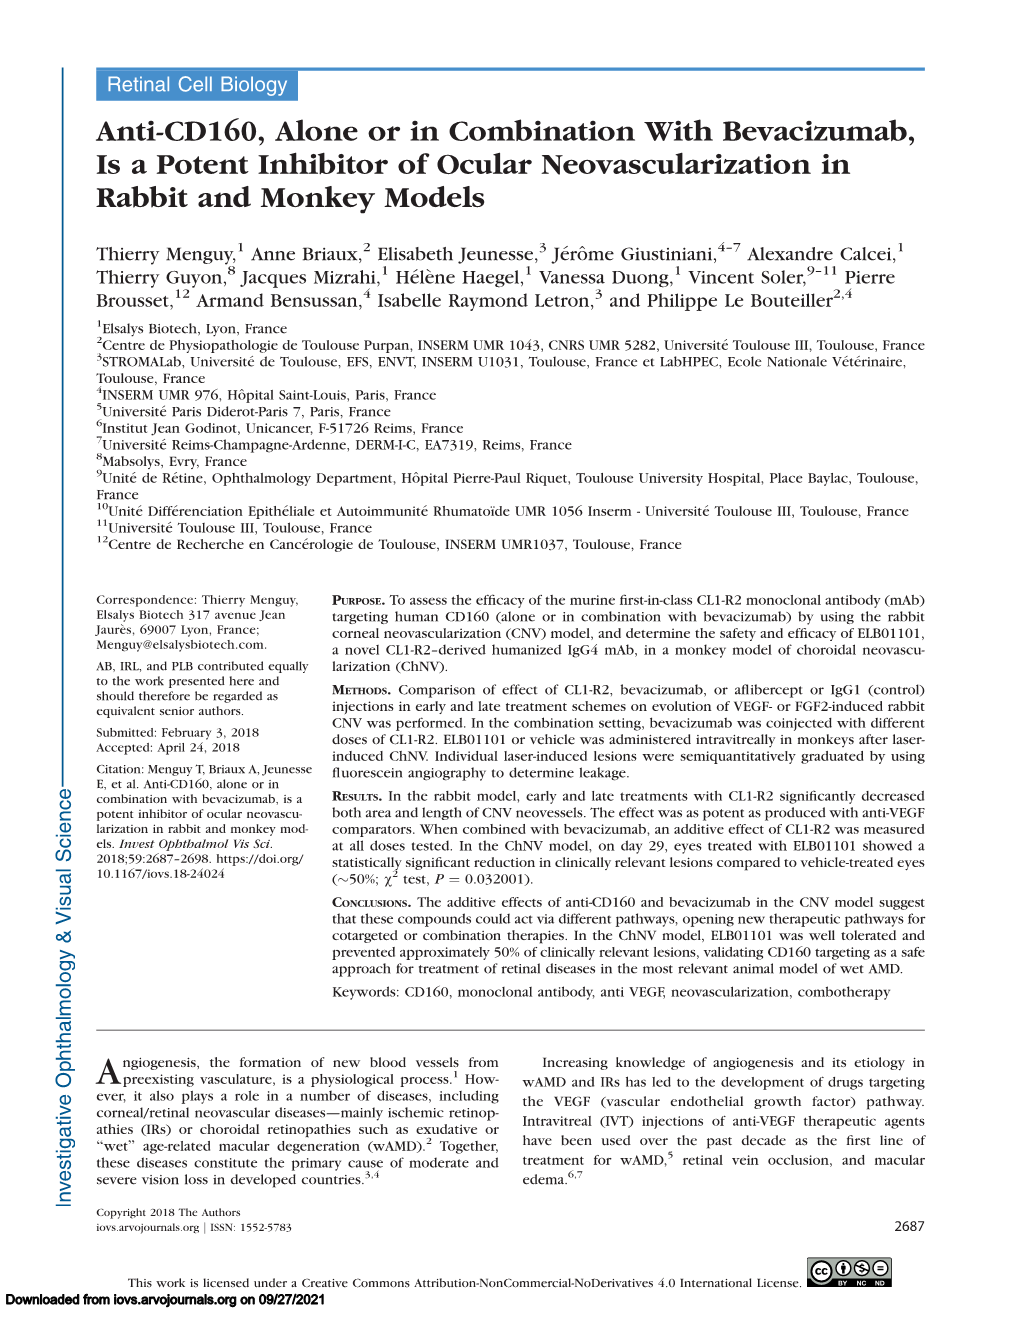 Anti-CD160, Alone Or in Combination with Bevacizumab, Is a Potent Inhibitor of Ocular Neovascularization in Rabbit and Monkey Models